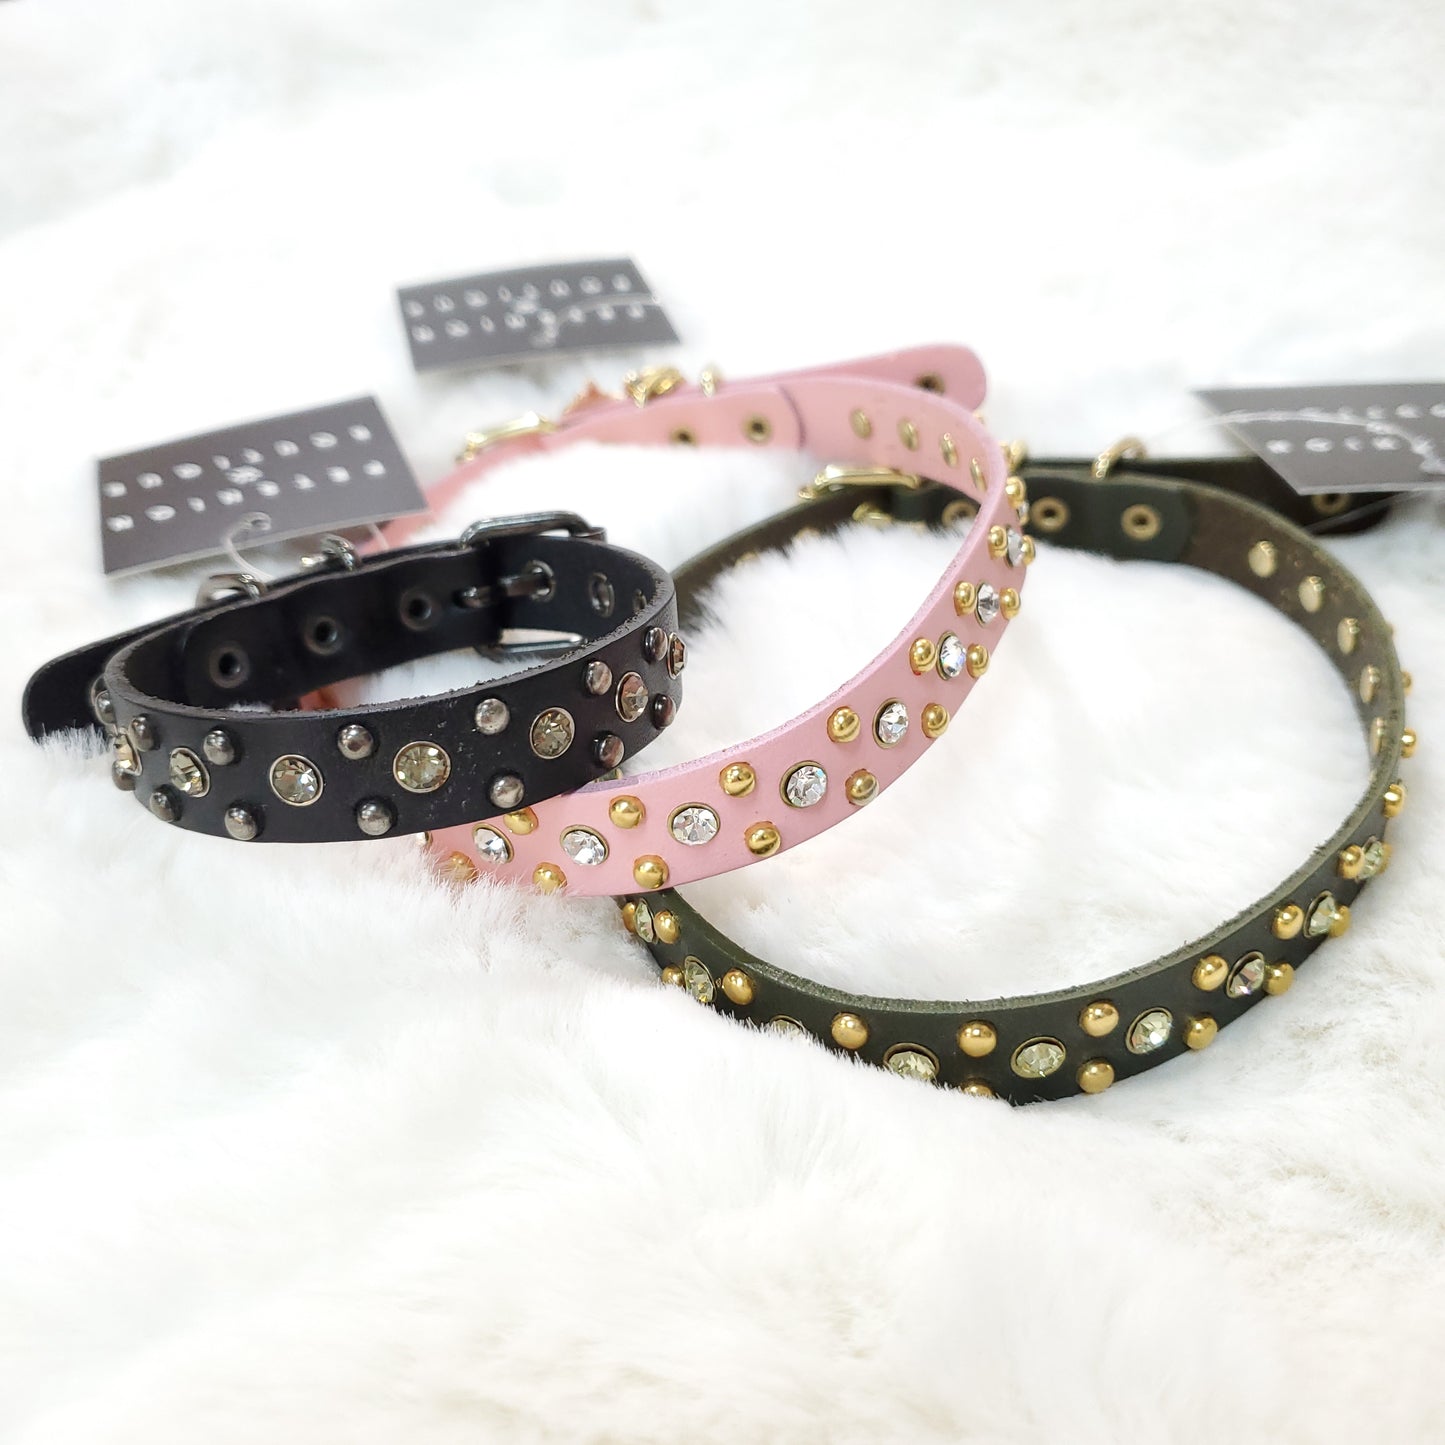 Premium. Leather collar with Studs and Swarovski for dog